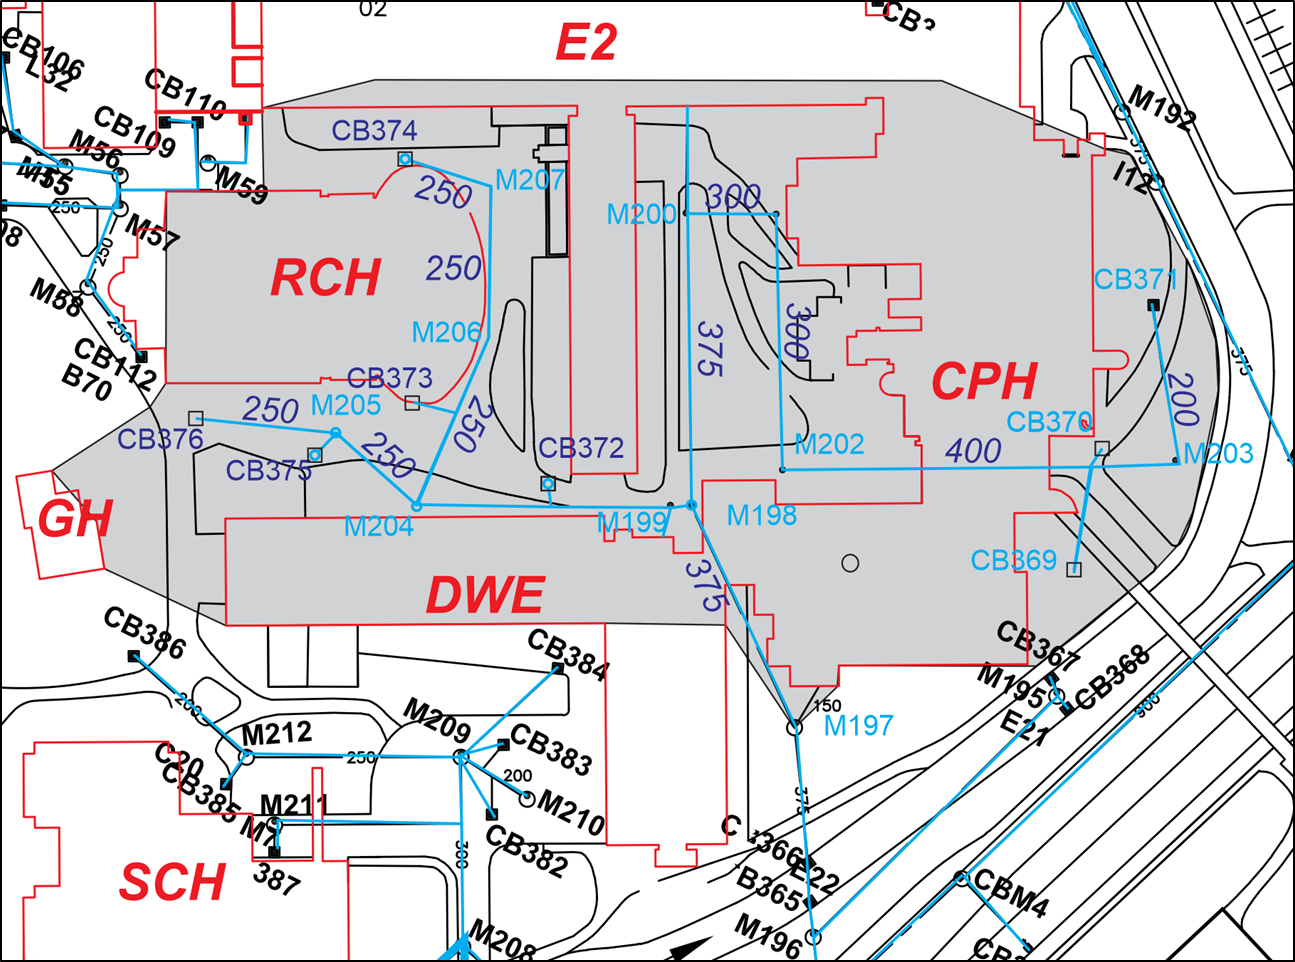 Schematic of information recorded in Campus SWM Master Plan for the area around E2, RCH, and CPH.  Grey shaded area is the approximate drainage basin.